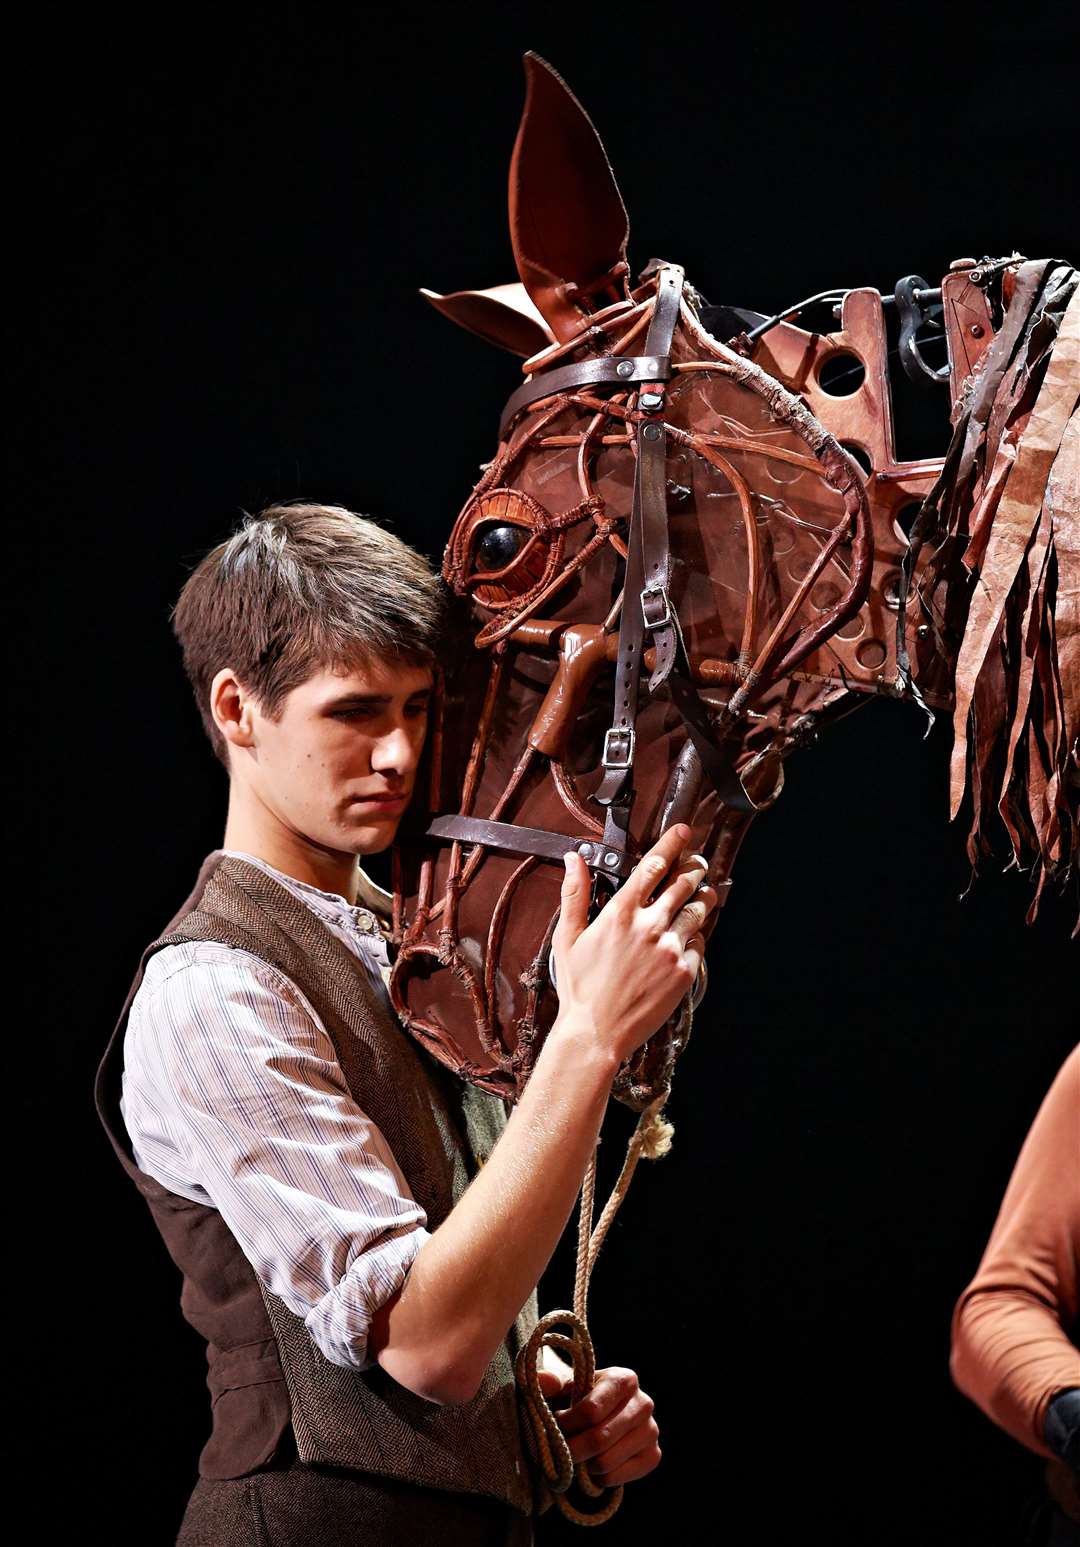 National Theatre at Home streams the stage production of War Horse